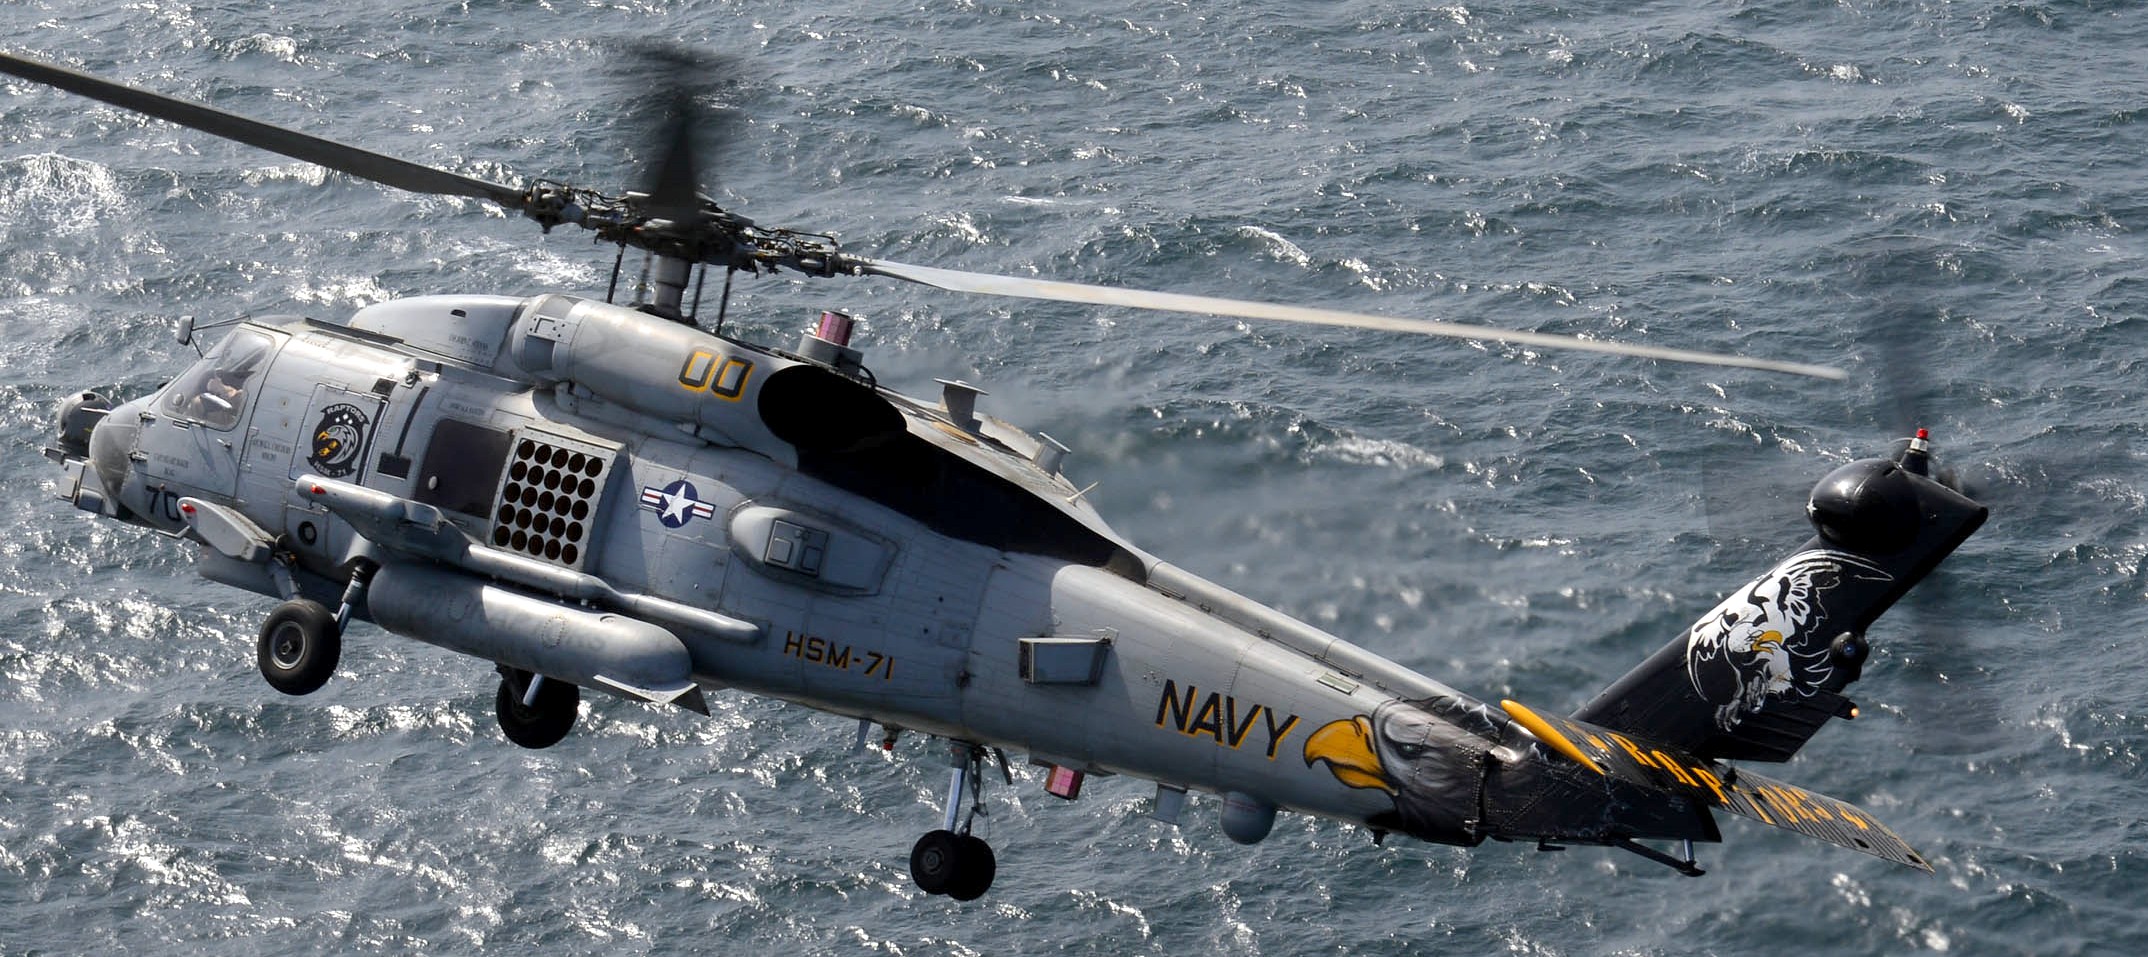 hsm-71 raptors helicopter maritime strike squadron mh-60r seahawk navy 2013 27